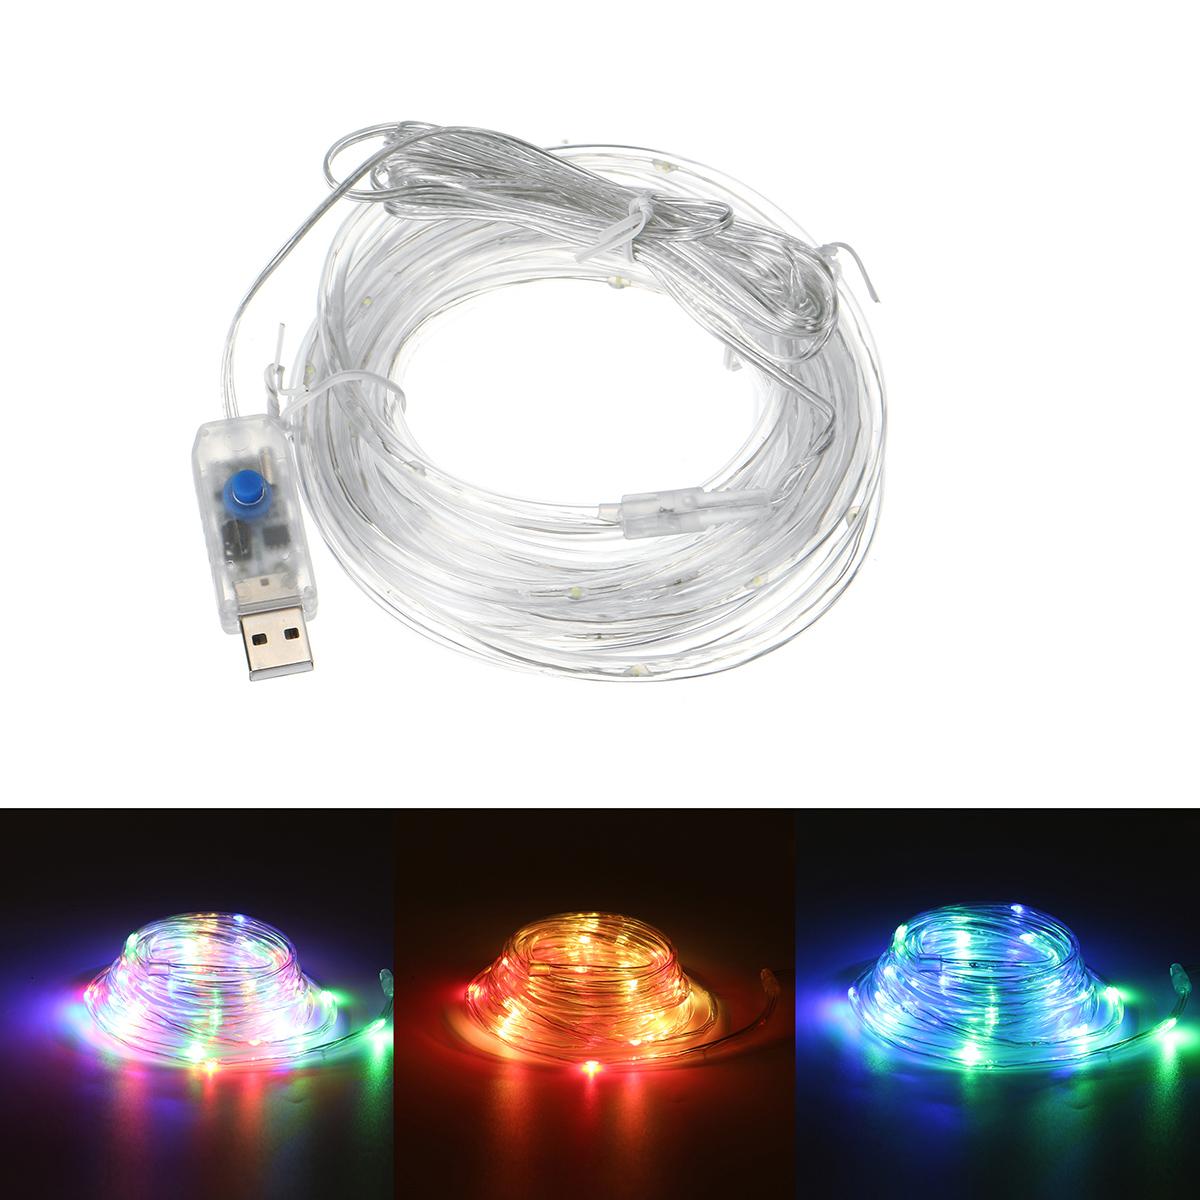 8-Modes-7M12M-50LED100LED-USBBattery-Powered-Stripe-Party-Lights-Decorative-Lamp-Christmas-Tree-Wate-1776816-1